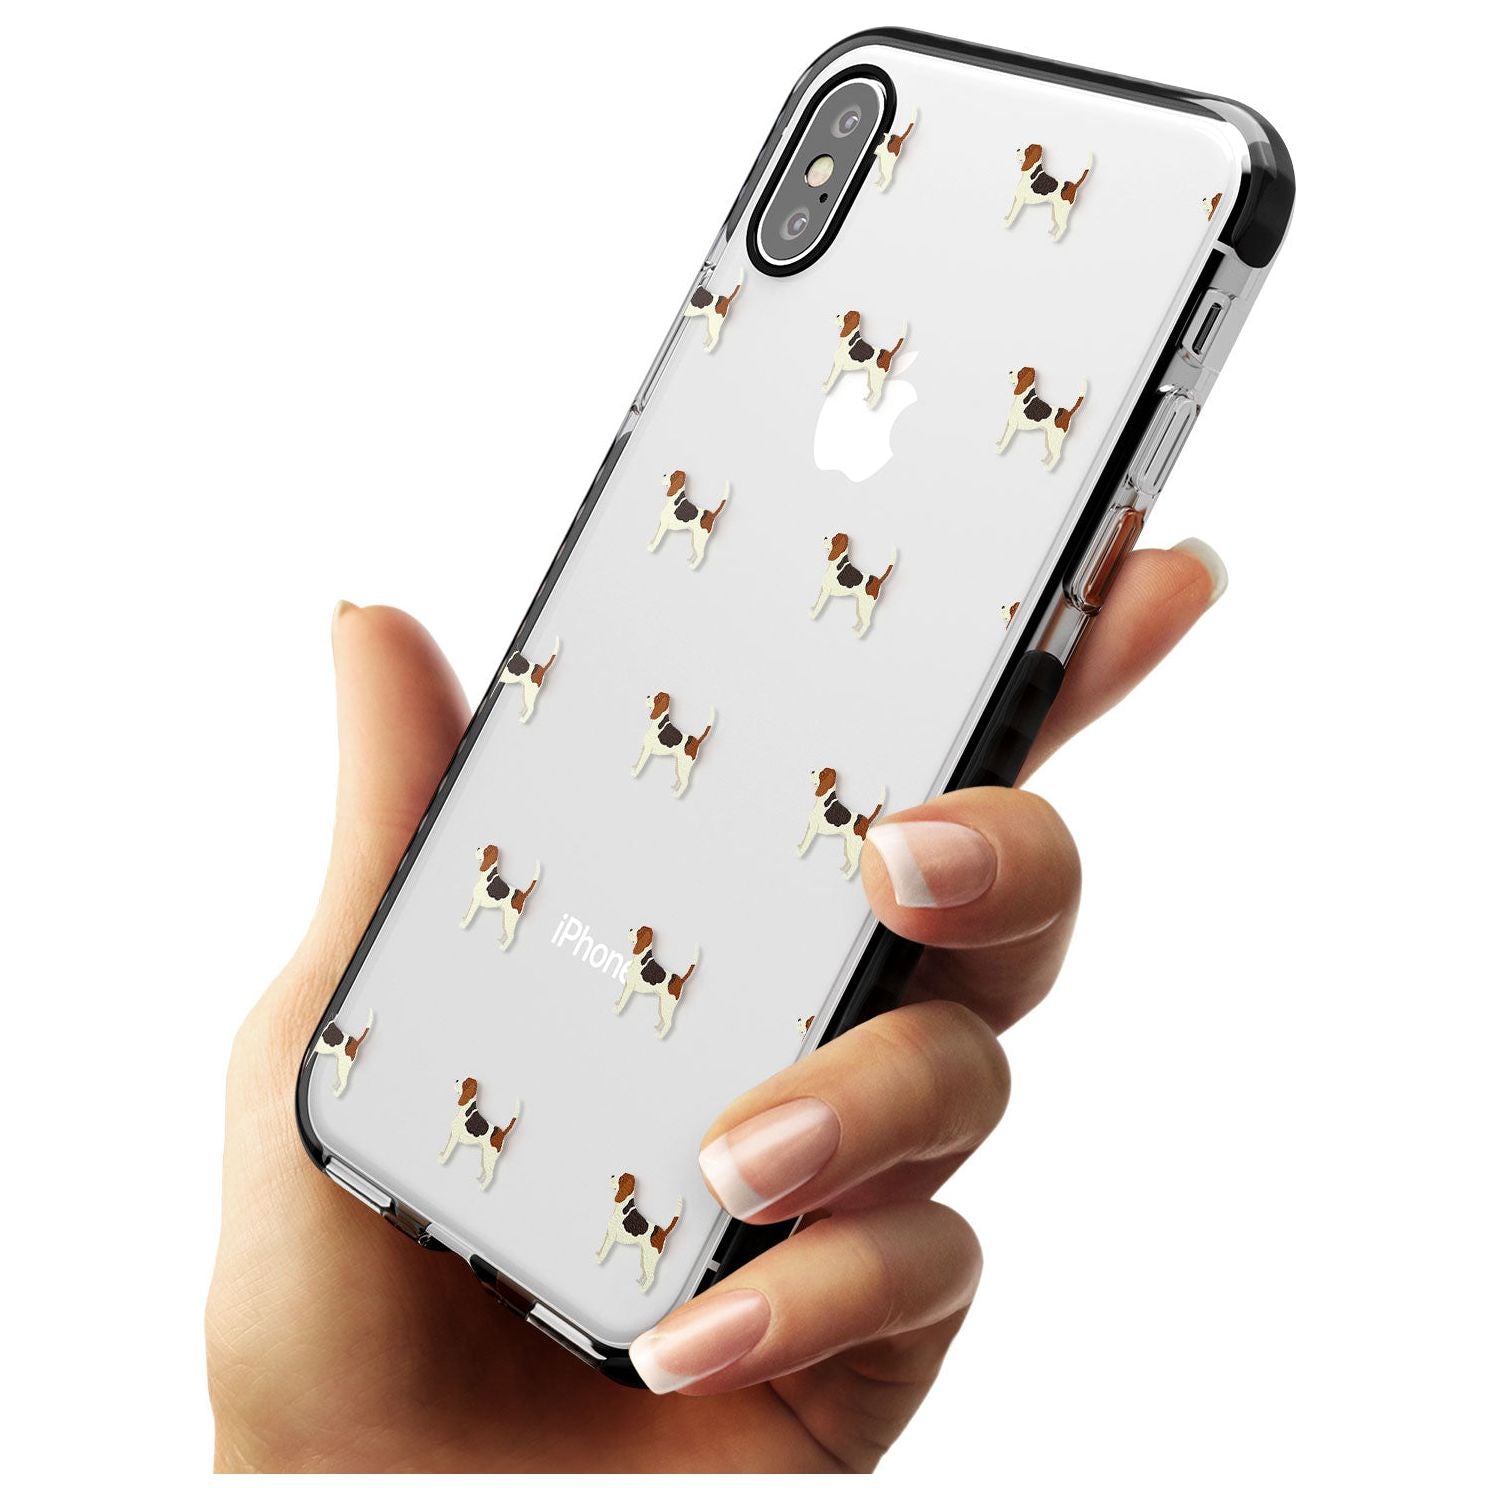 Beagle Dog Pattern Clear Black Impact Phone Case for iPhone X XS Max XR